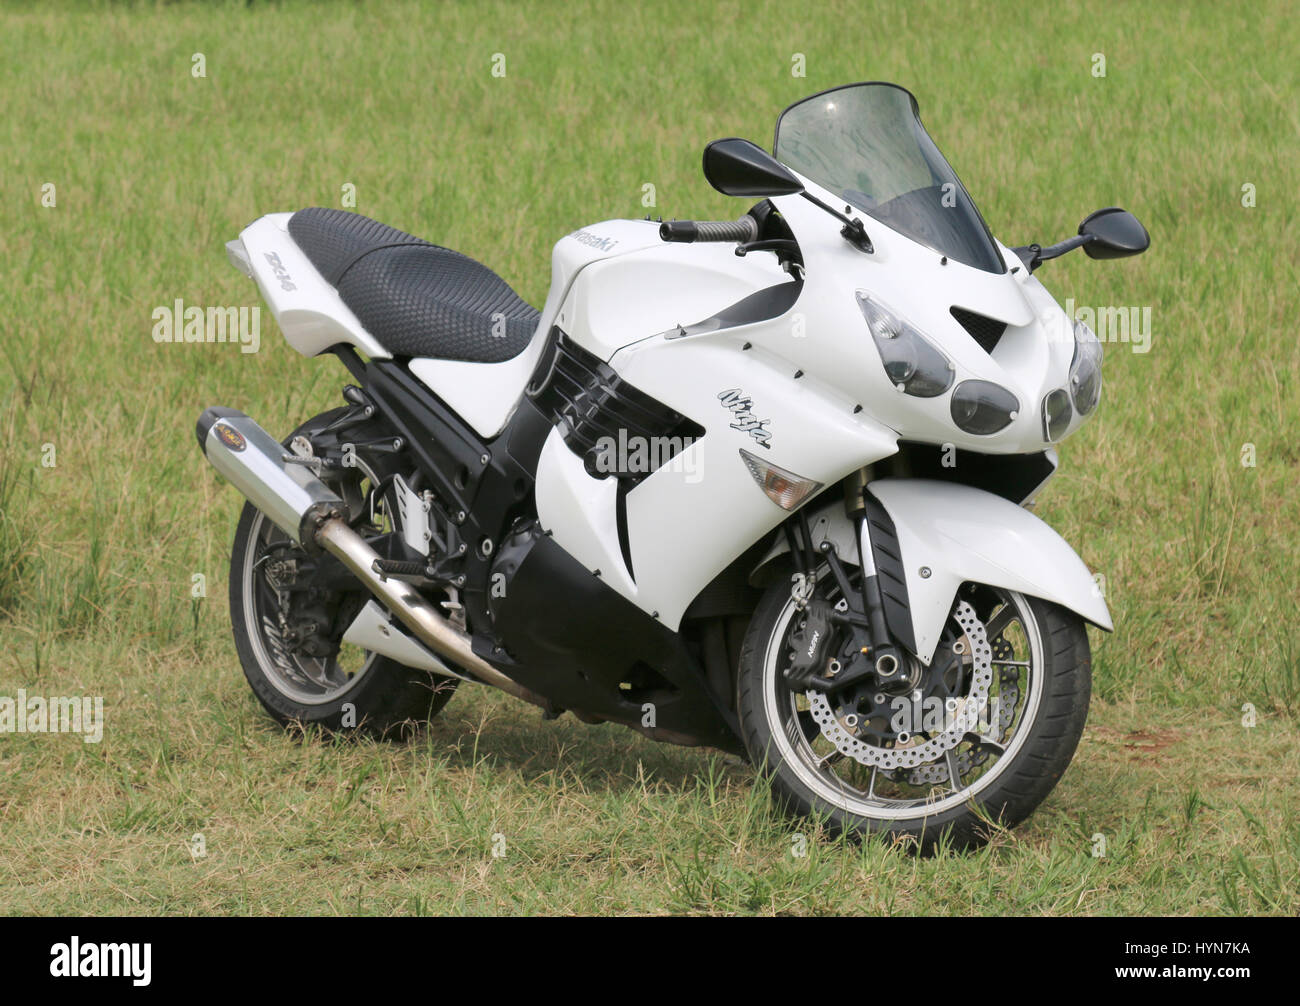 Kawasaki Zx 12r High Resolution Stock Photography and Images - Alamy